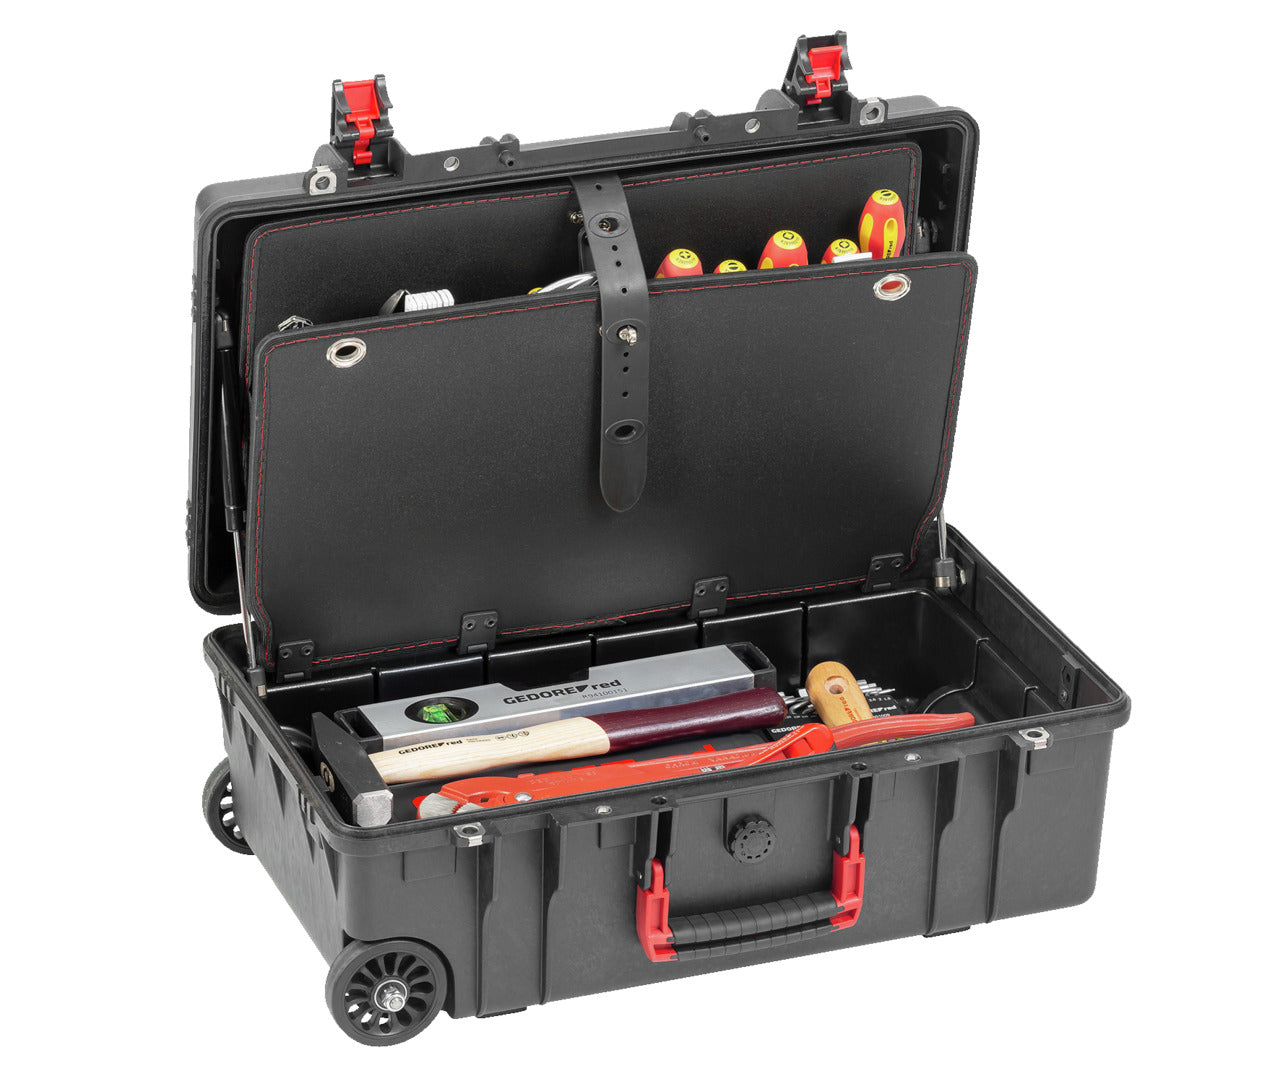 GEDOREred R21902072 - Trolley suitcase with assortment of plumbing tools (3301644)